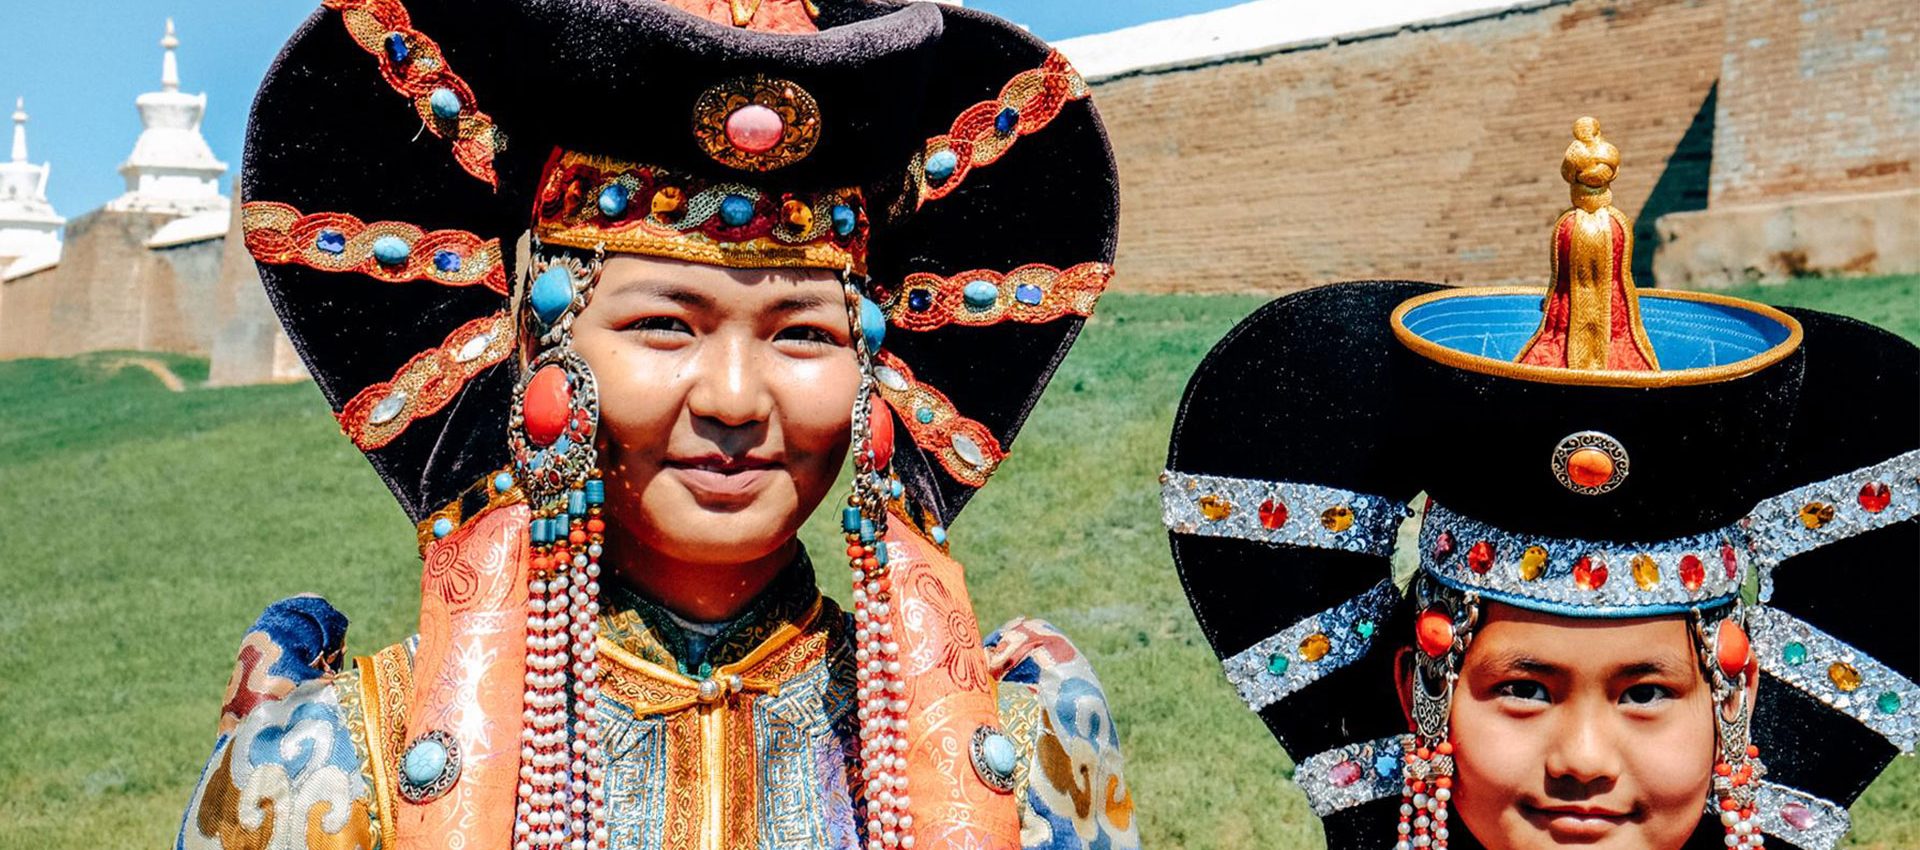 The main element of a headdress is a special hairstyle, designed to mimic cow's horns, cows symbolizes freedom in Mongolia.